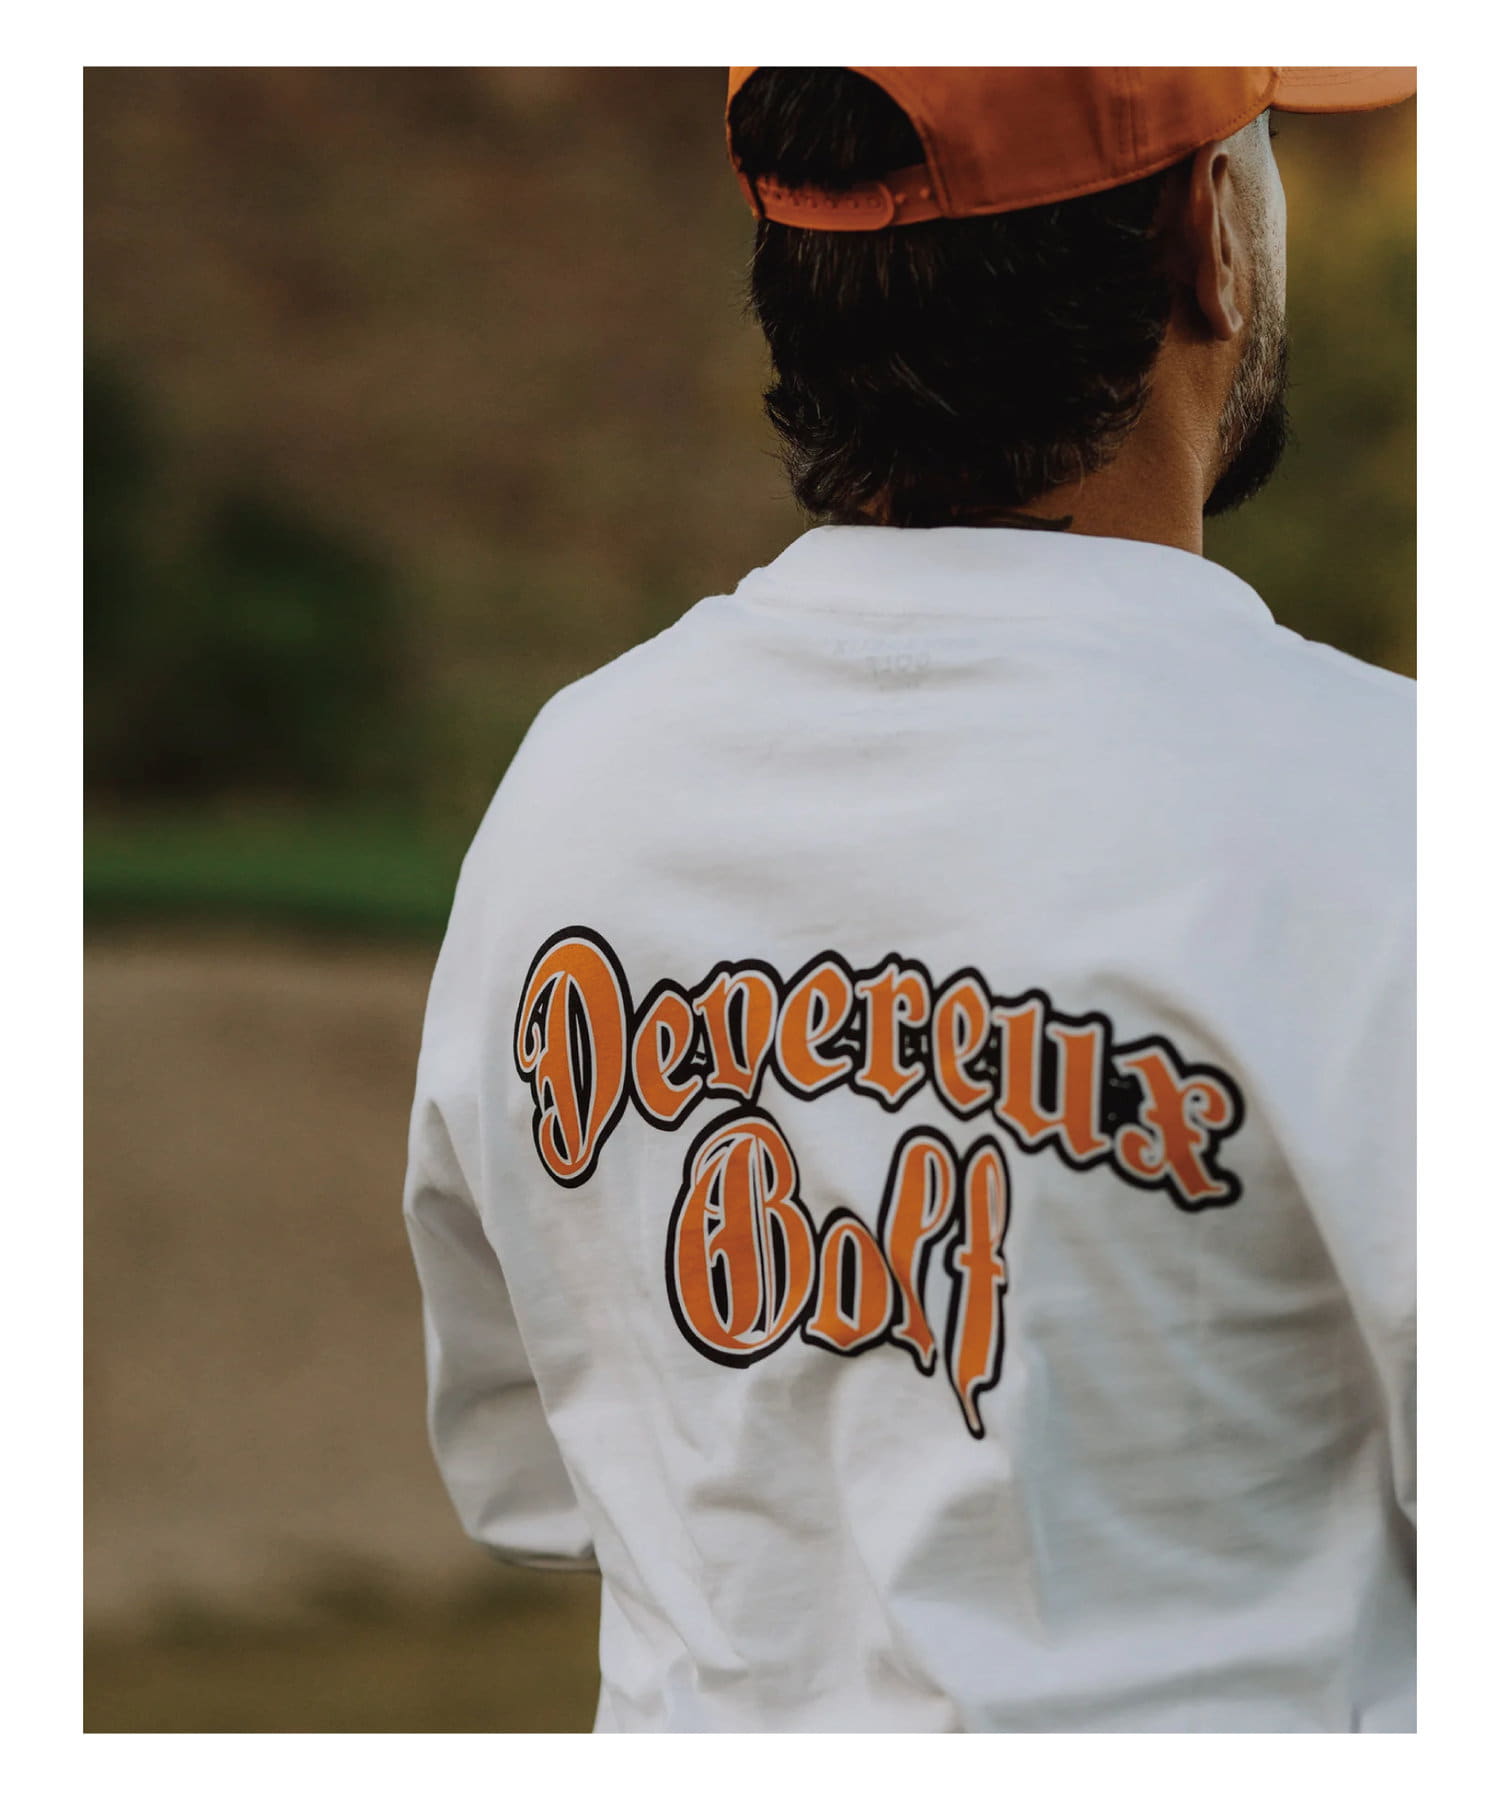 twoles(トゥレス) 【DEVEREUX GOLF】Checked Longsleeve T